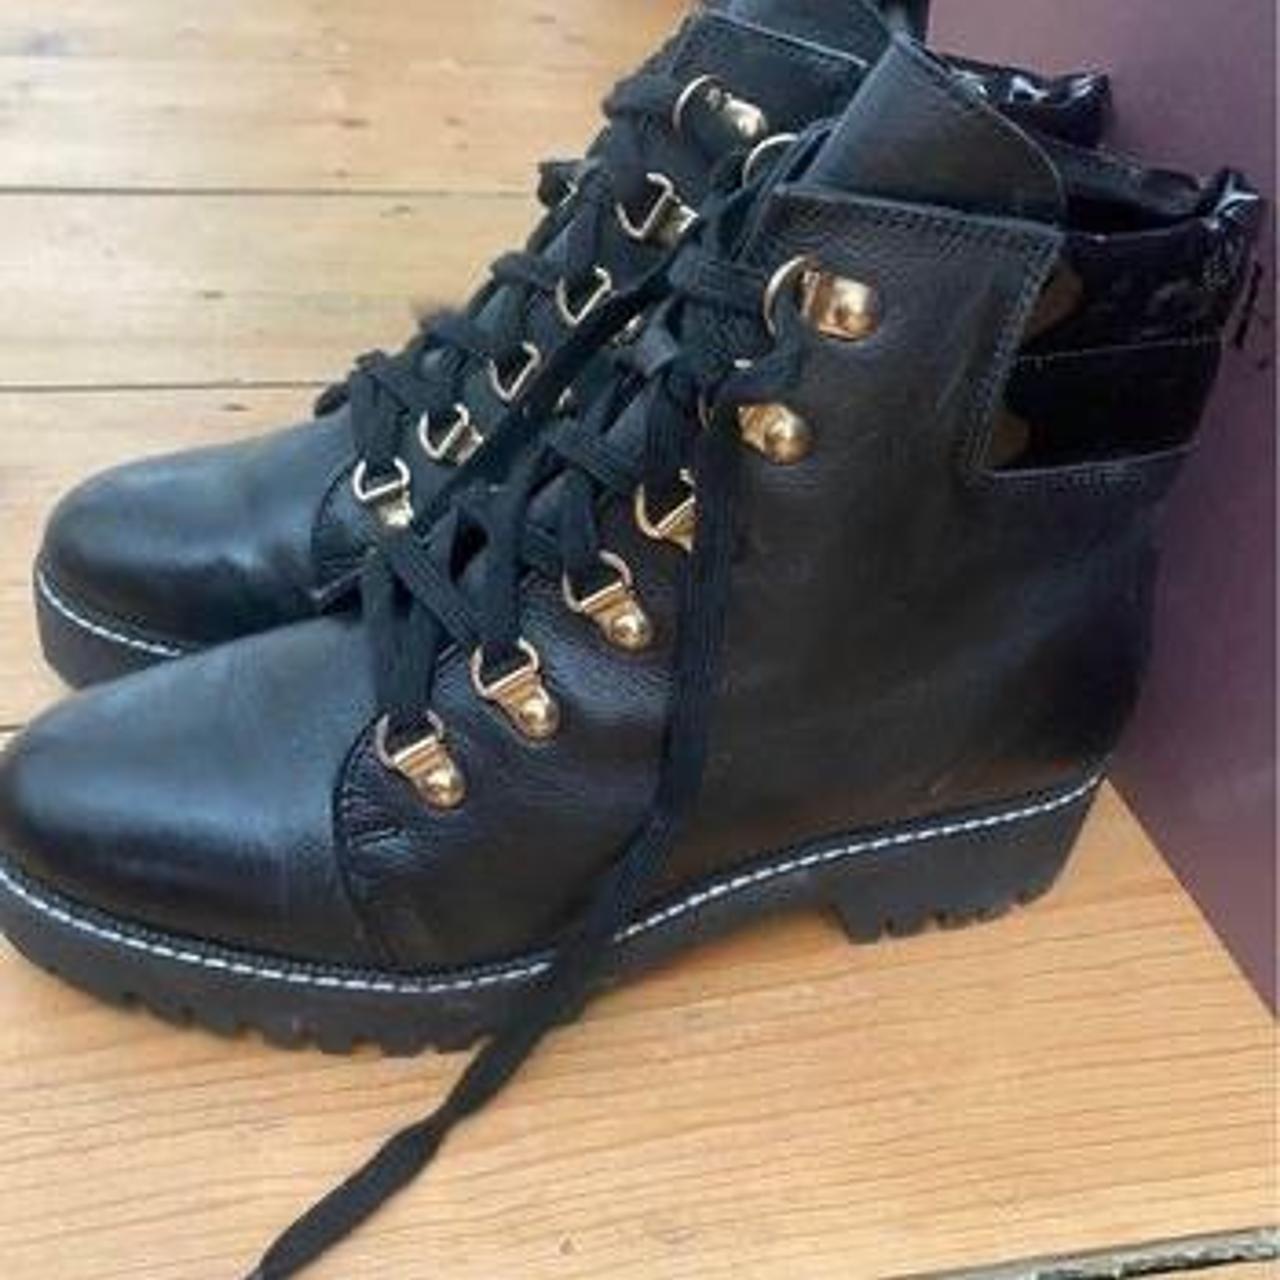 Women's Black and Gold Boots | Depop